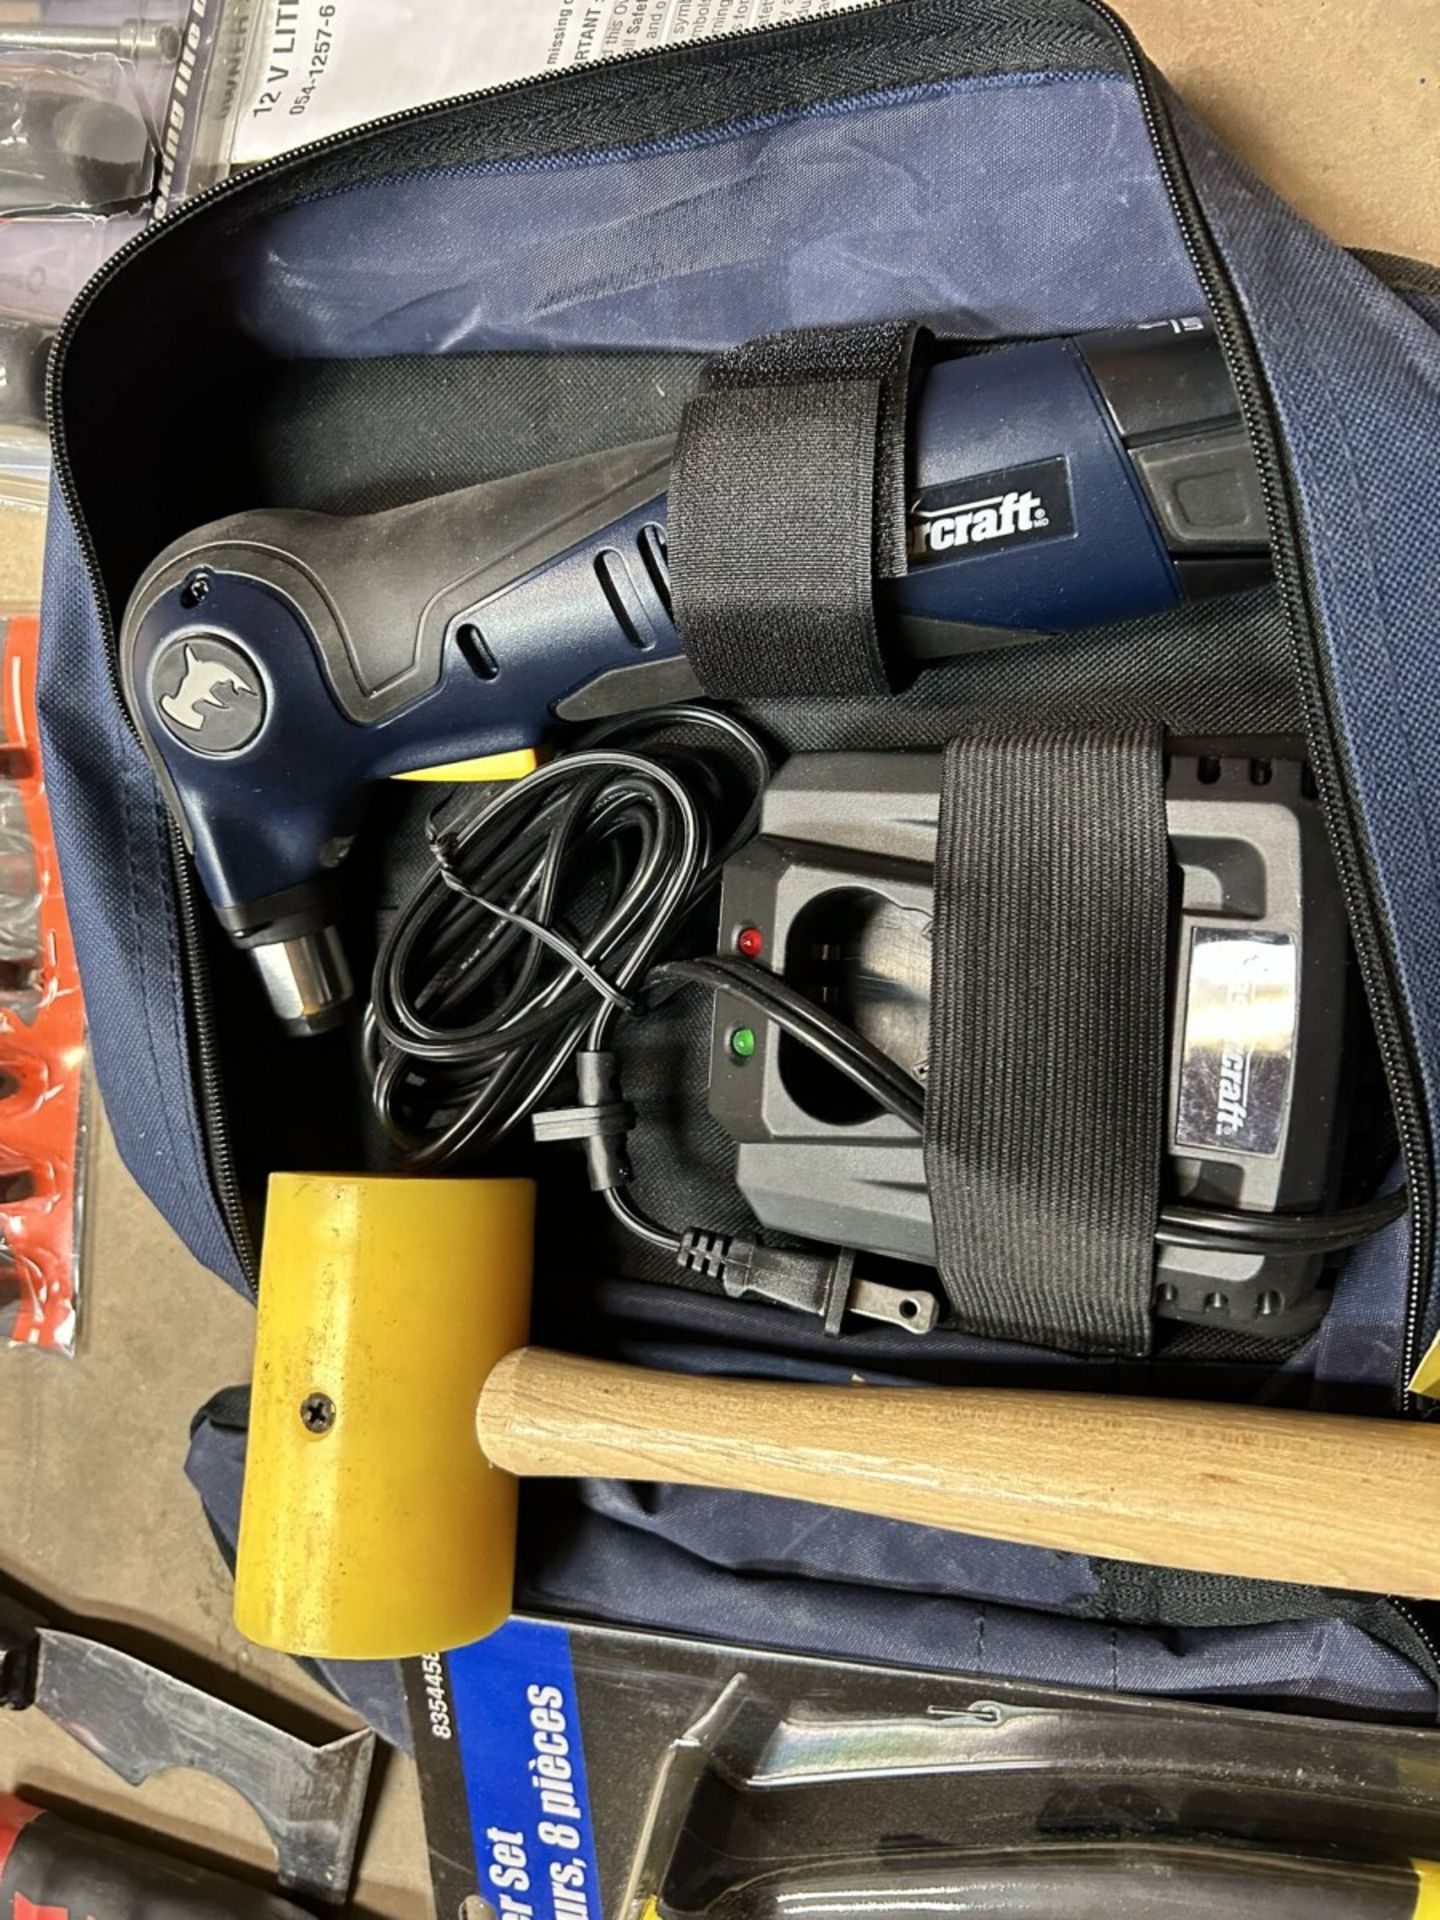 MASTERCRAFT 12V LITHIUM-ION AUTO HAMMER W/ASSORTED SCRAPERS AND ASSORTED HAND TOOLS - Image 6 of 6